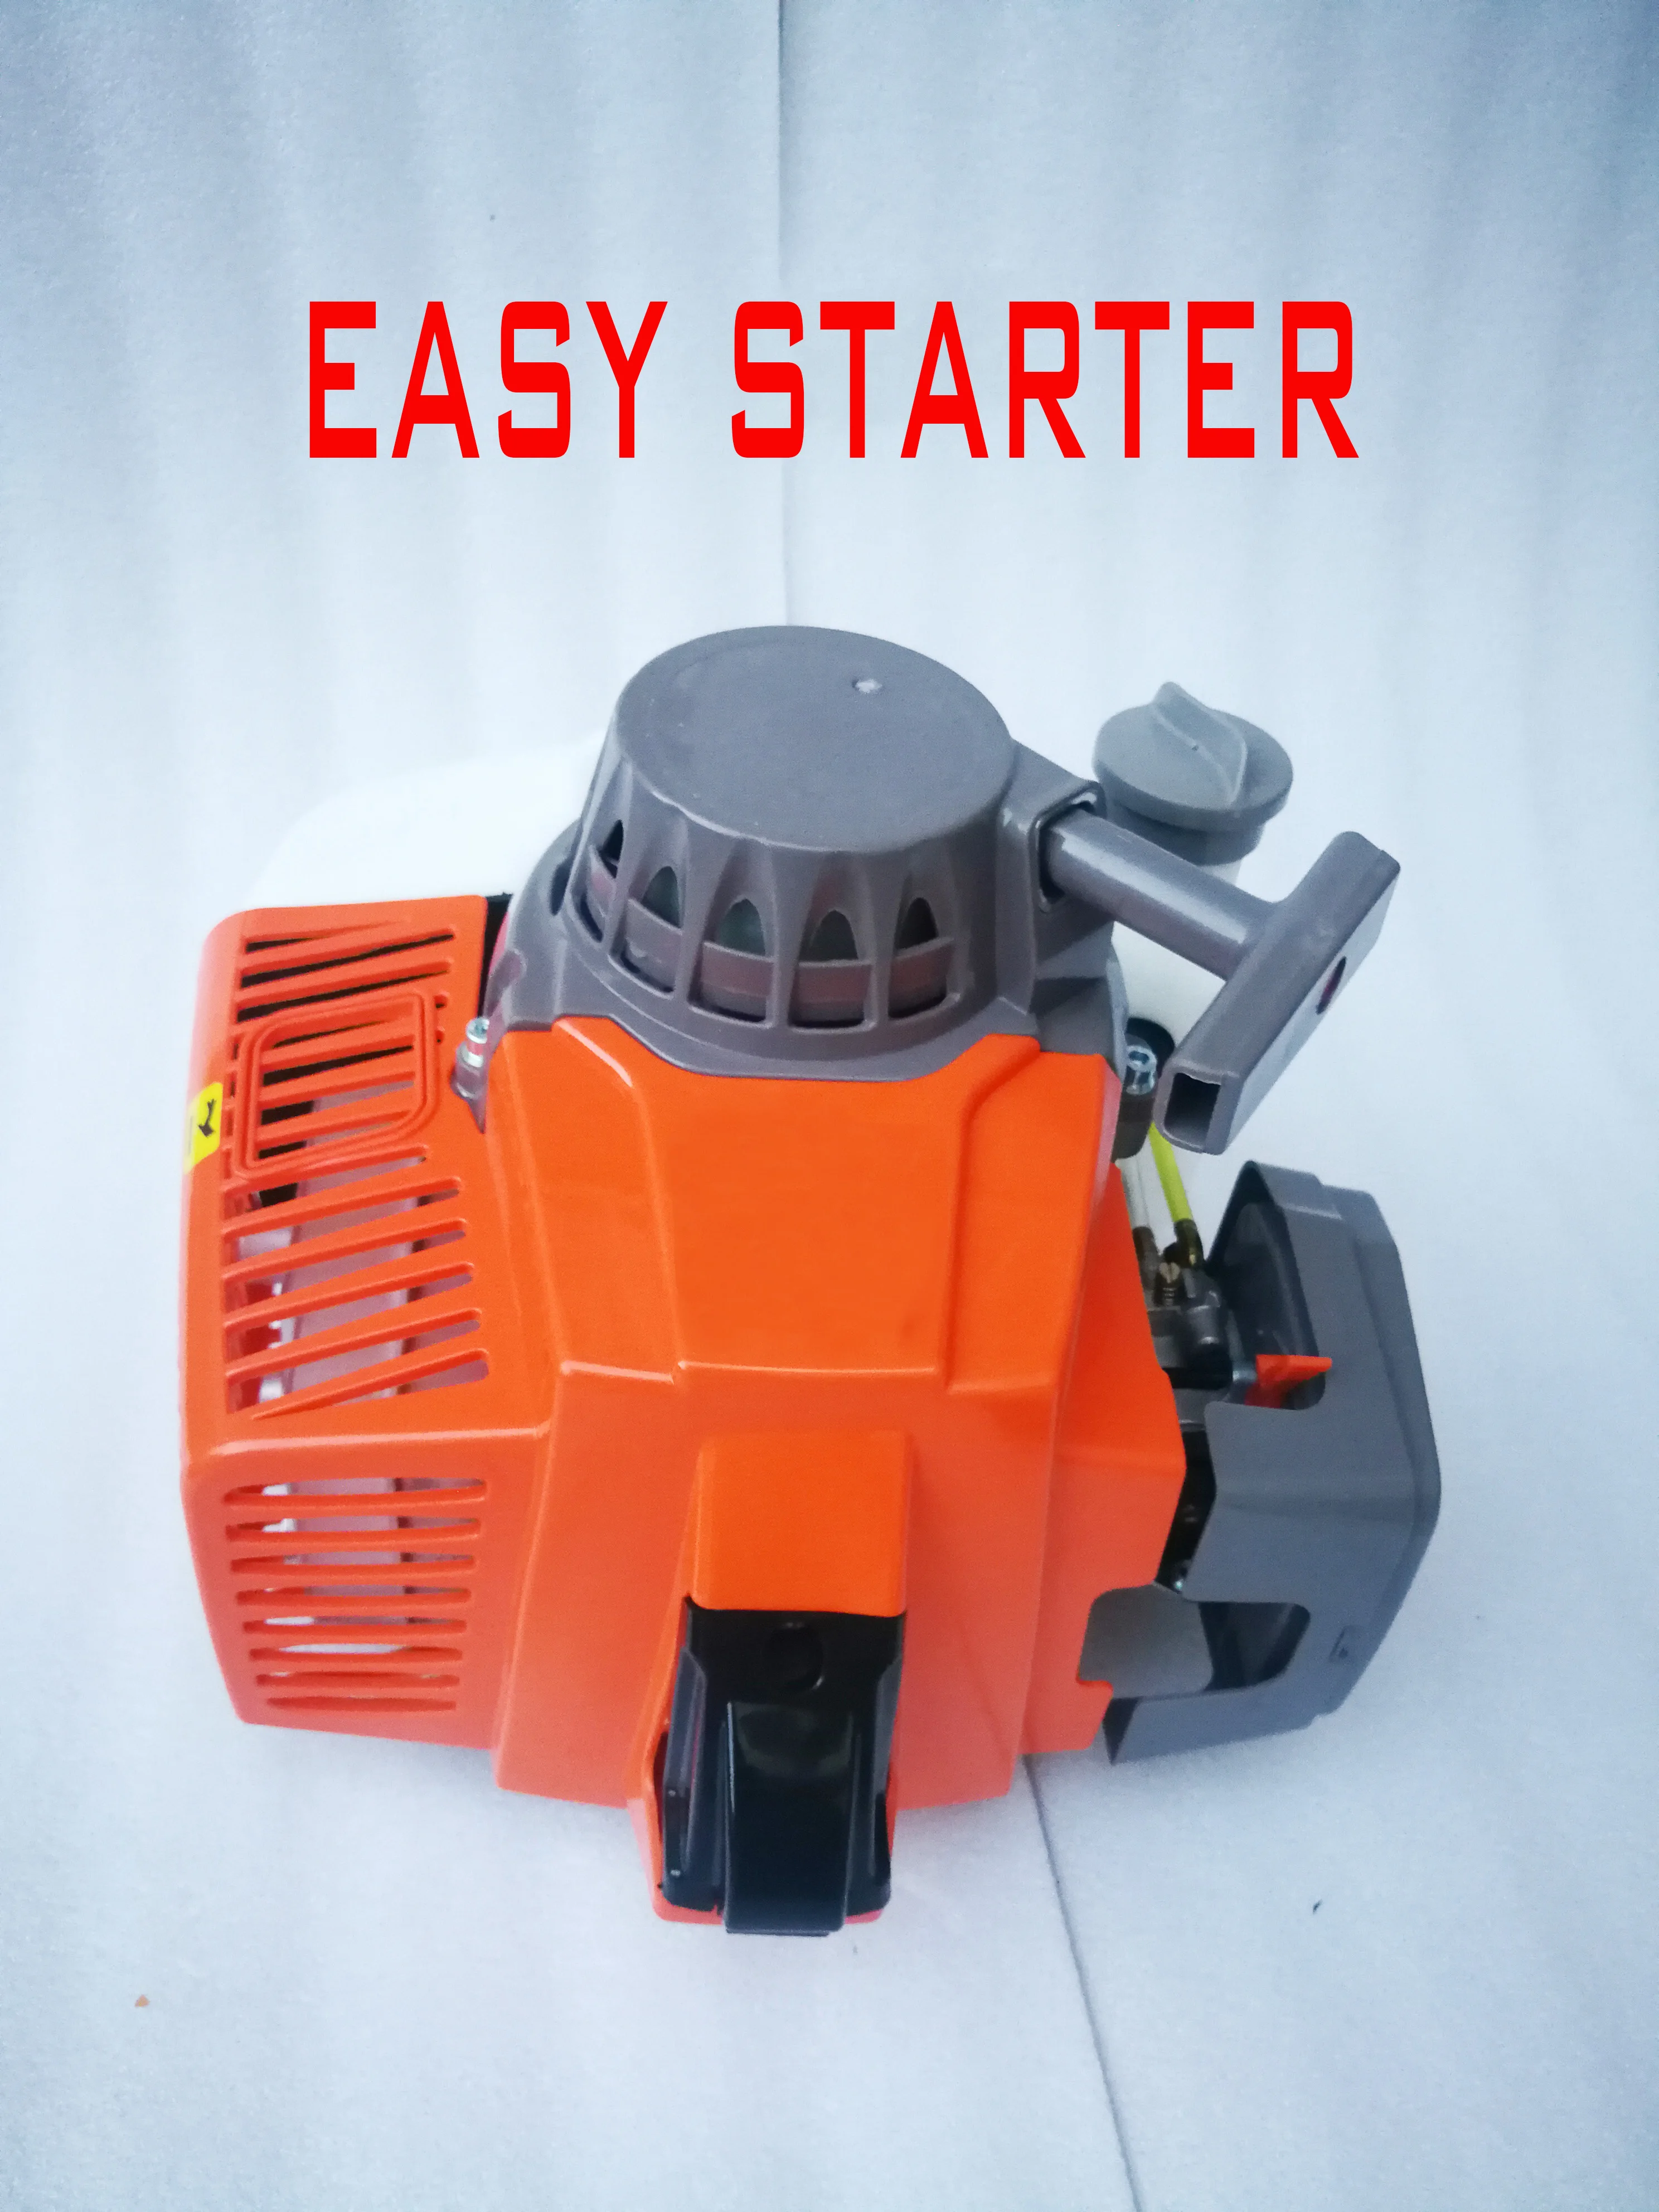 Really 80cc 1E53F 2T  Gasoline Engine 2 Stroke For Earth Drill Brush Cutter Goped  Scooter Outboart Motor  53mm Cylinder Piston enlarge